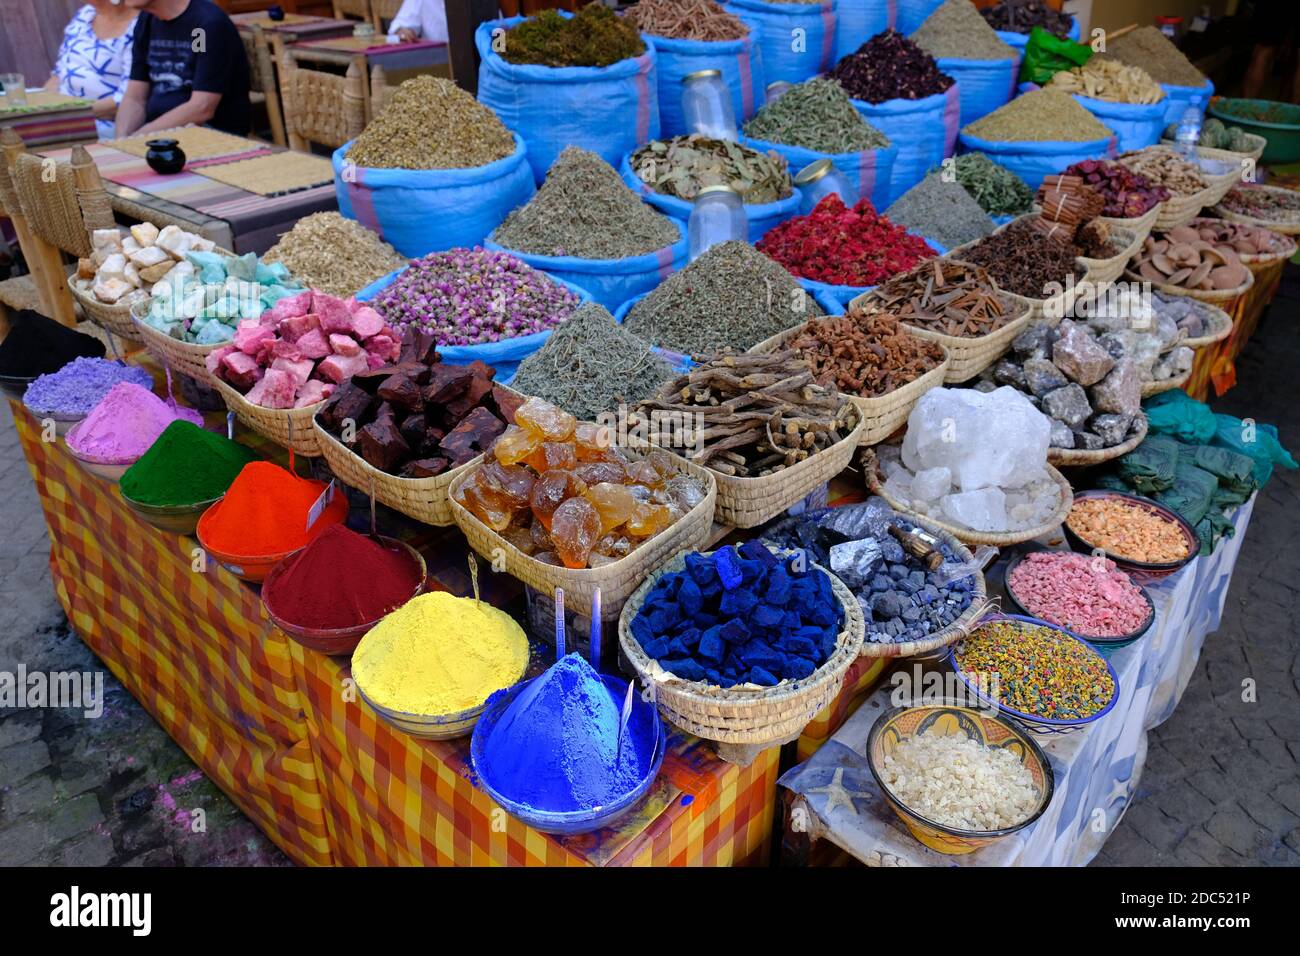 Morocco Marrakesh - Colorful stall spice and dye samples of a spice dealer Stock Photo